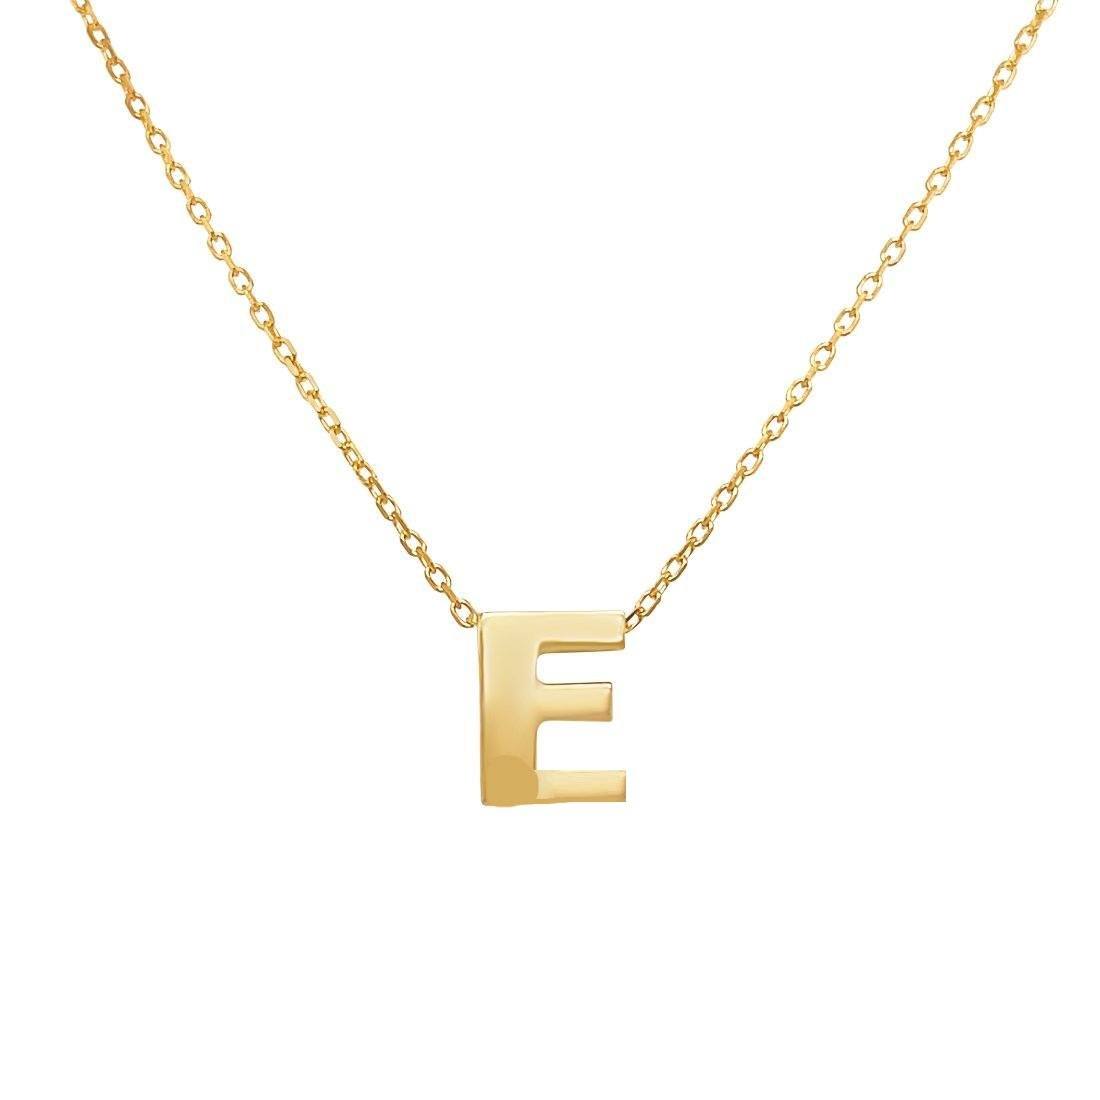 9ct Yellow Gold Silver Infused Initial Pendant Necklace Necklaces Bevilles E 